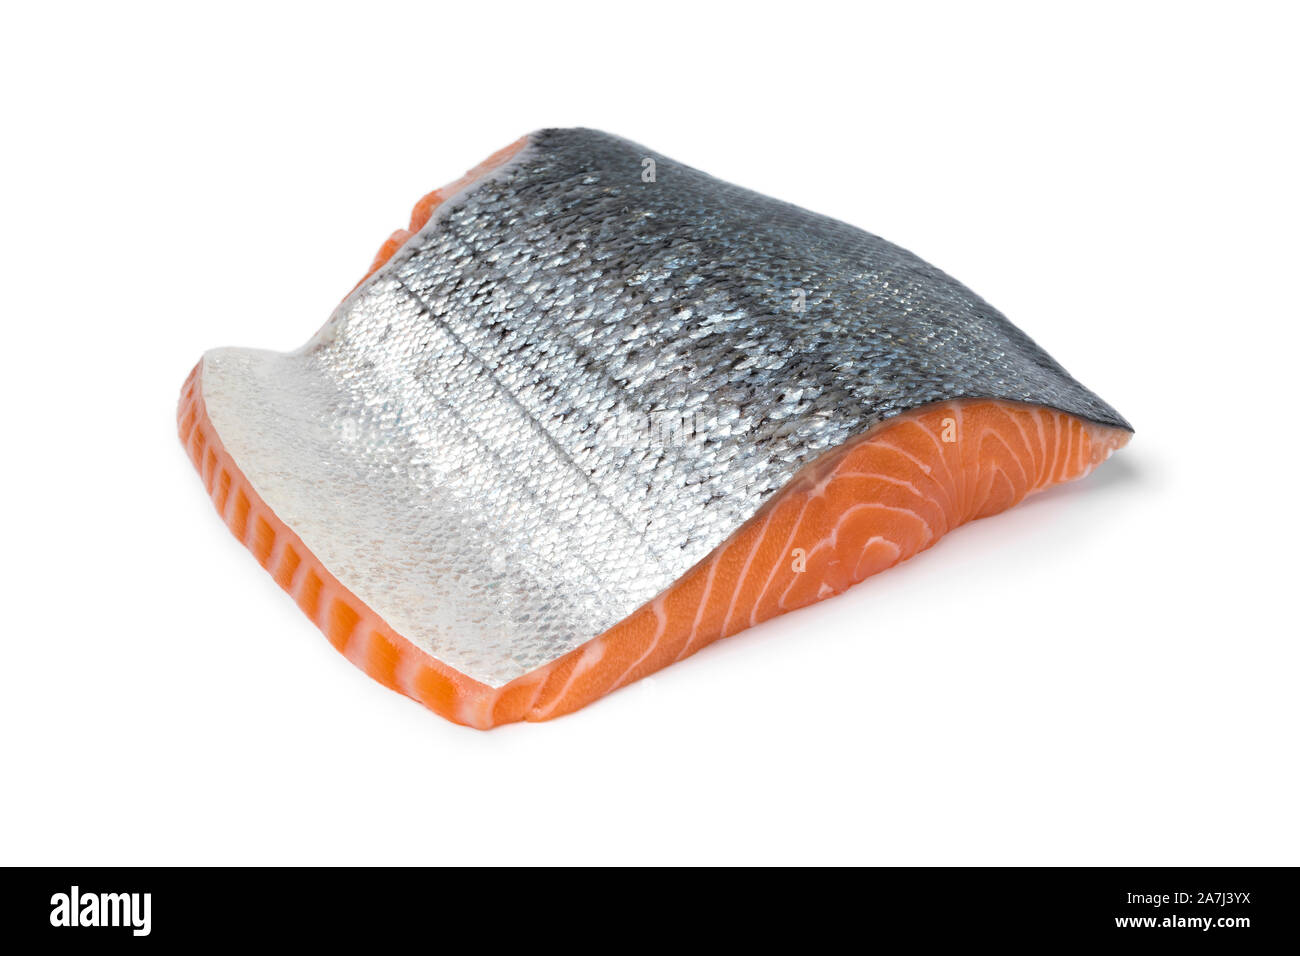 Piece of fresh raw salmon fillet with silver skin isolated on white background Stock Photo